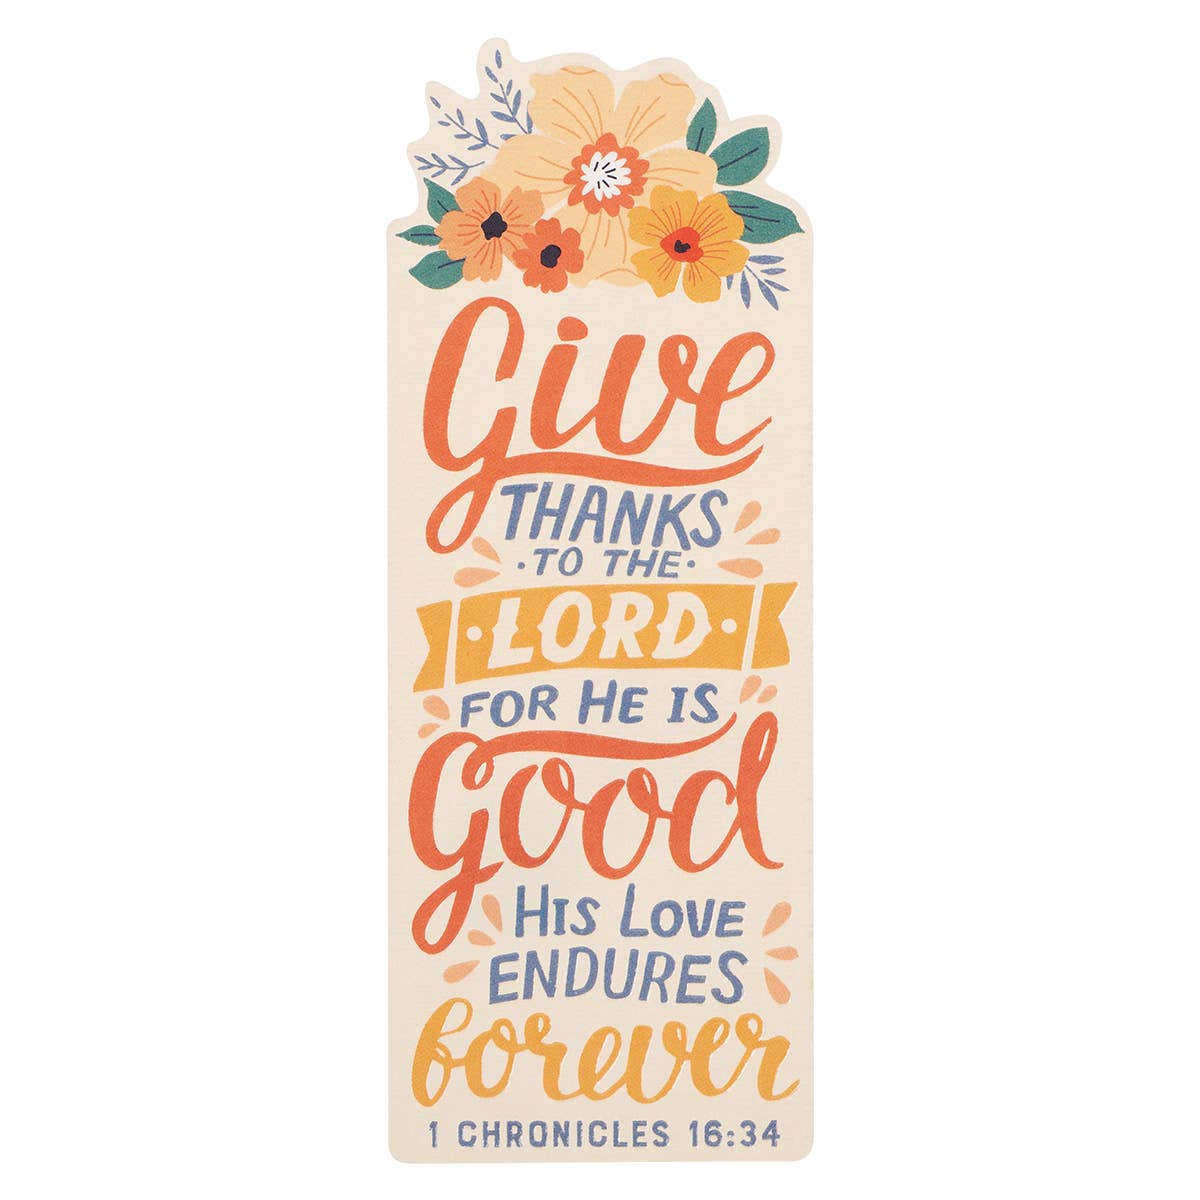 Give Thanks Floral Premium Cardstock Bookmark - 1 Chronicles 16:34